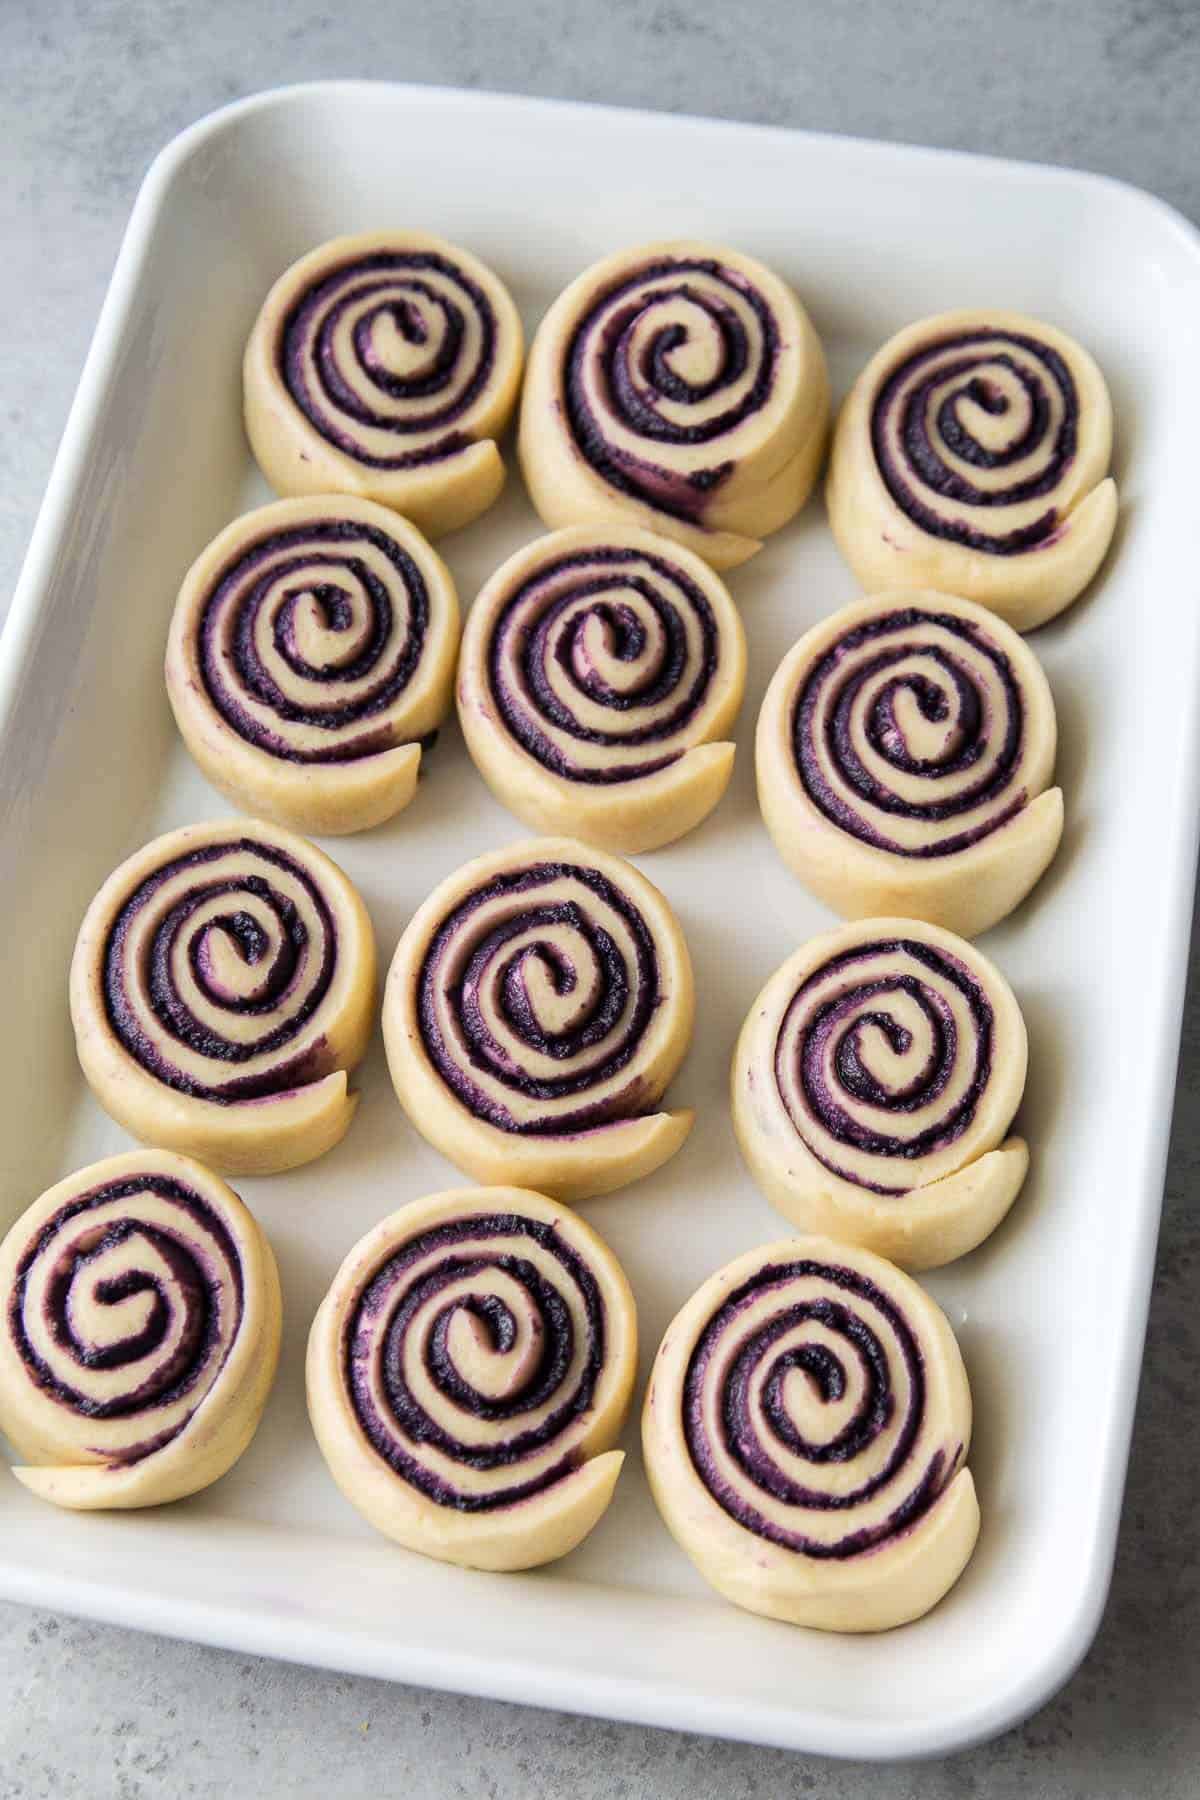 ube bread rolls after proofing.